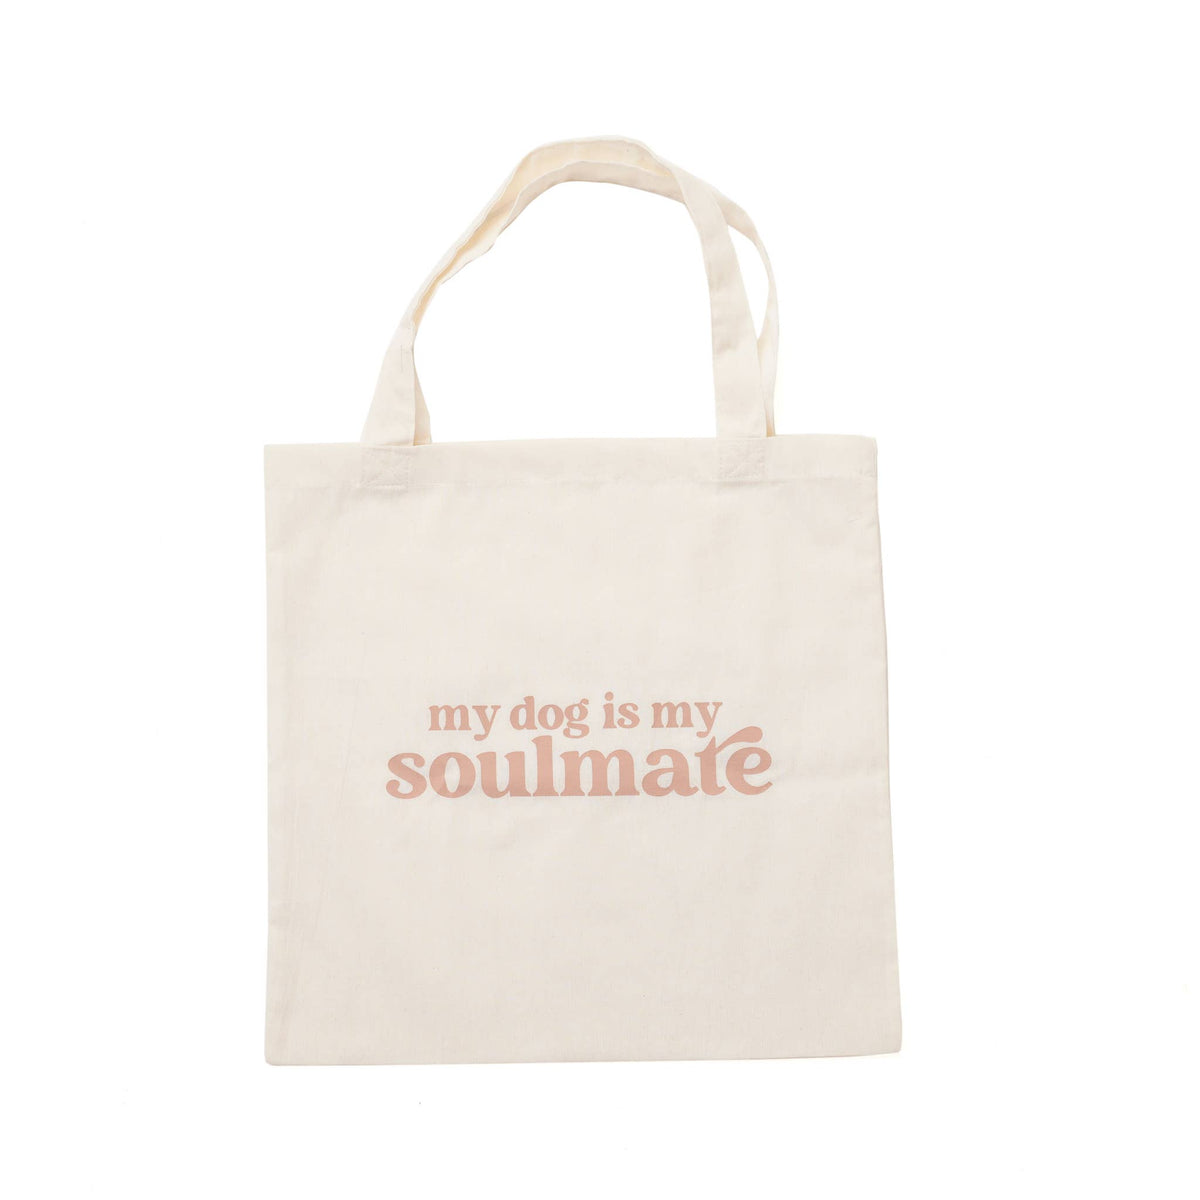 Tote • my dog is my soulmate